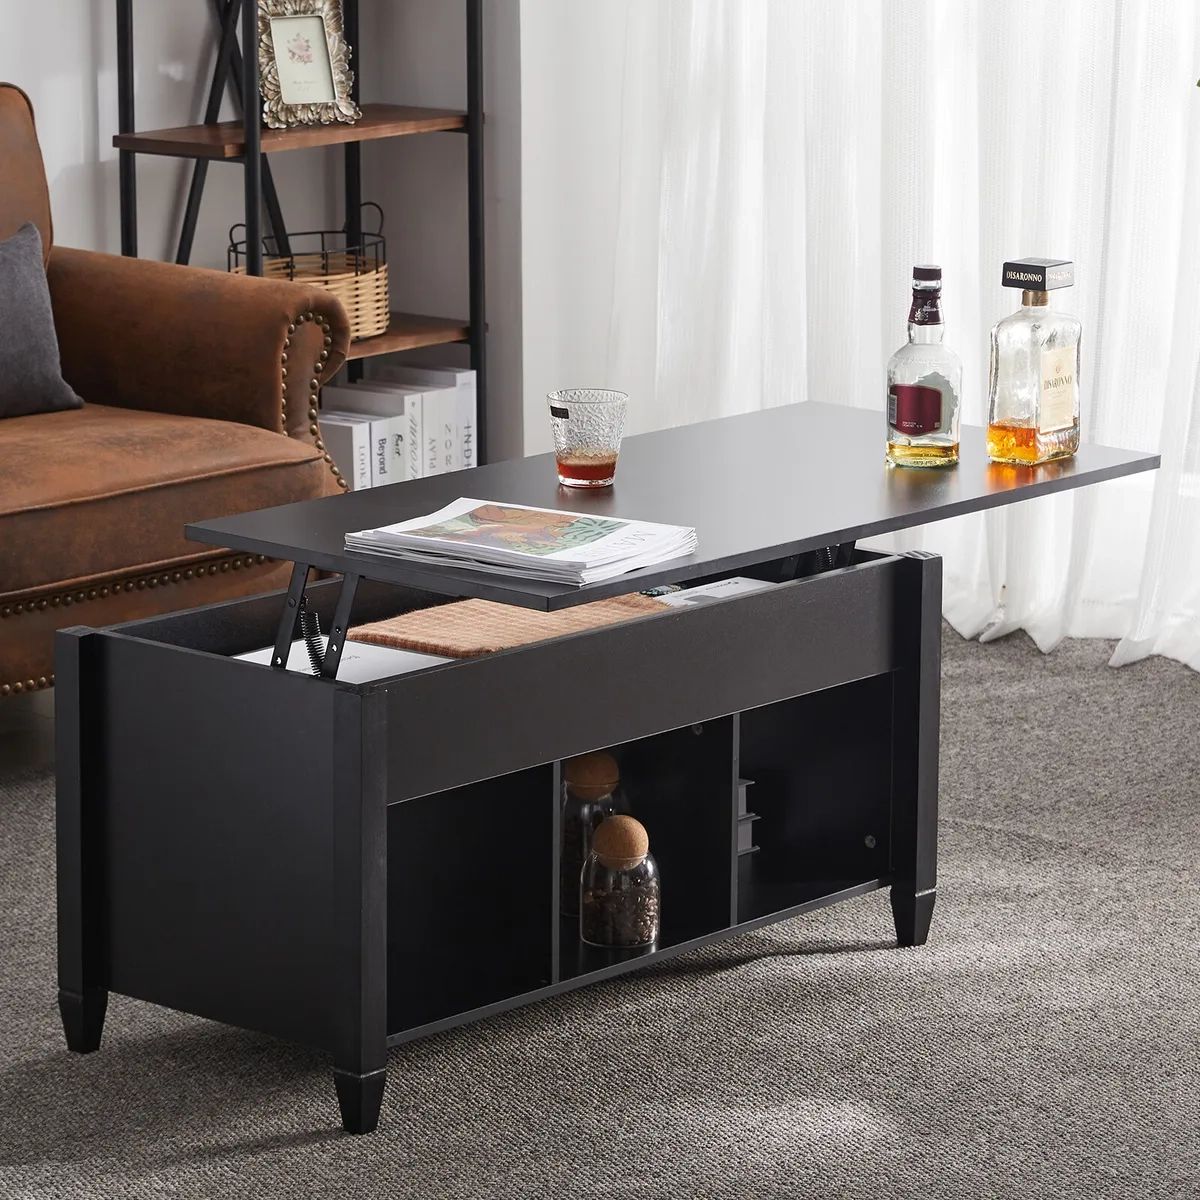 Modern Lift Top Coffee Table W/hidden Compartment And Storage For Living  Room Us | Ebay Pertaining To Modern Coffee Tables With Hidden Storage Compartments (Photo 15 of 15)